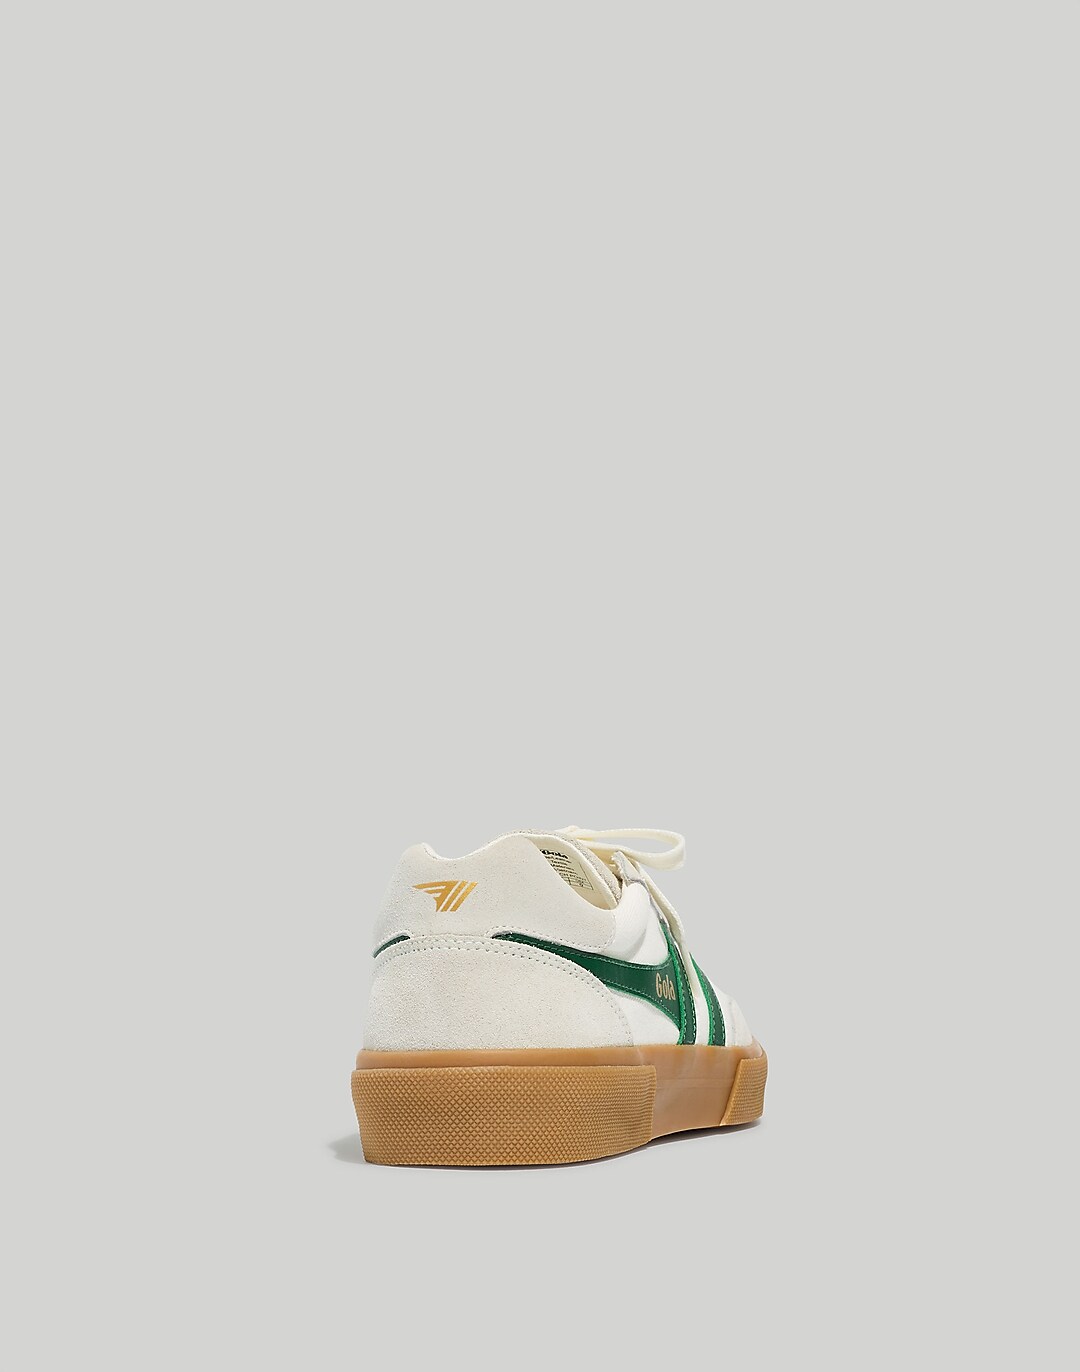 Buy Gola men's Match Point trainer in off white/green online from gola